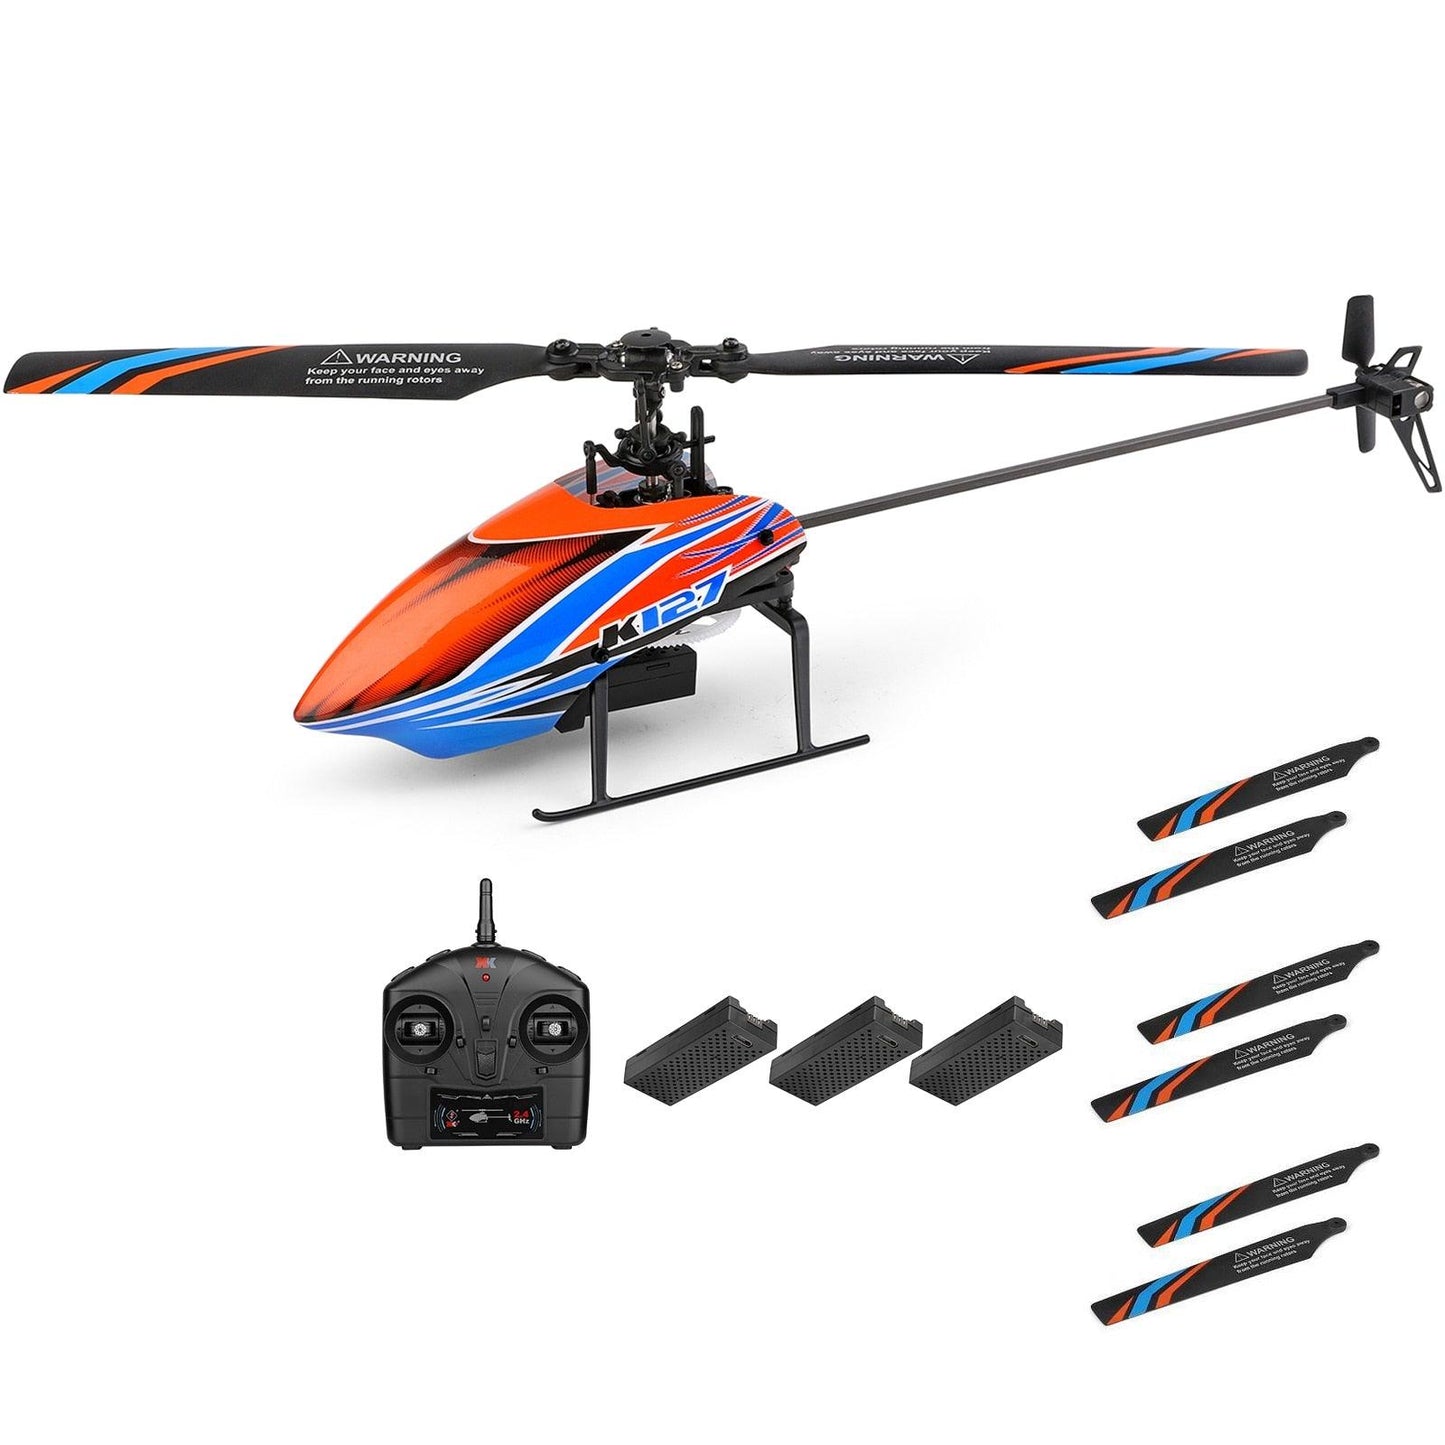 WLtoys K127 RC Helicopter - 2.4G 4CH 6-Aixs Gyroscope Single Blade Propellor Helicopters for Kids Gift Toys - RCDrone